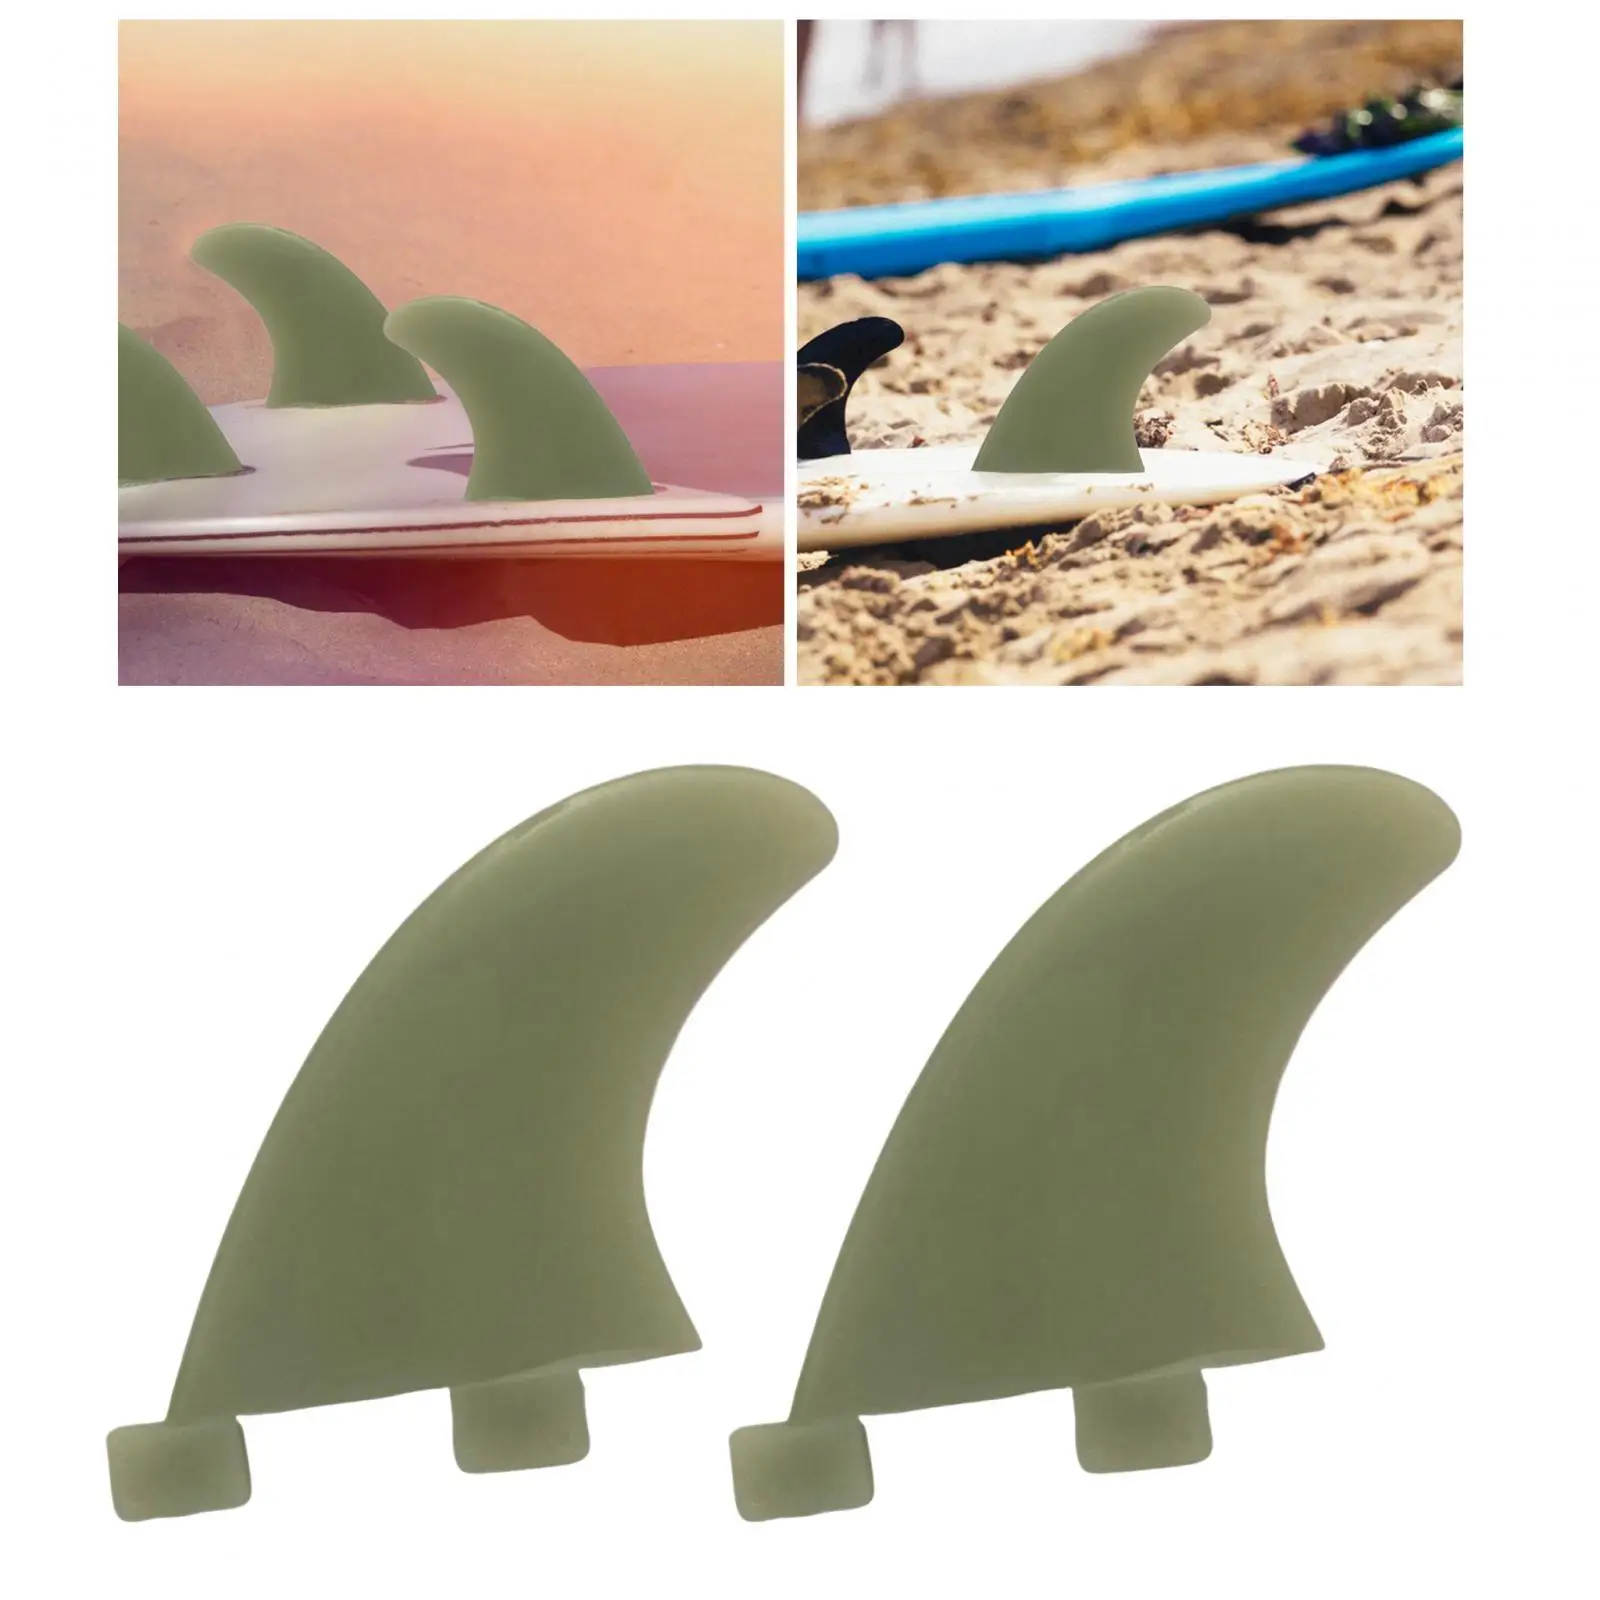 2x Universal Surfboard Fin Replacement Surfing Durable for Canoe Stand up Paddleboard Water Sports Accessory